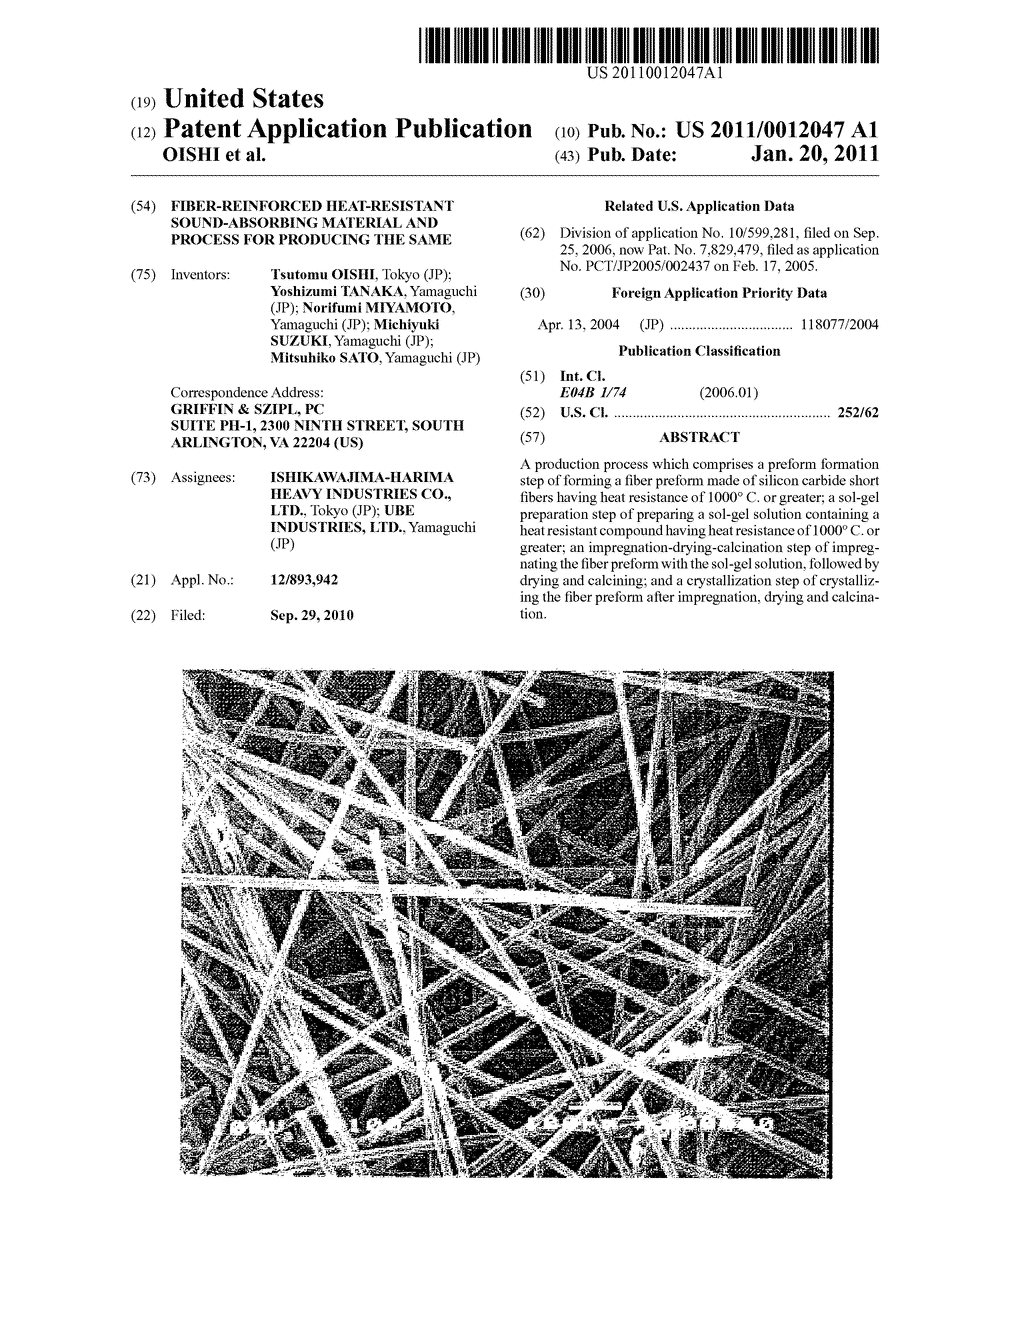 FIBER-REINFORCED HEAT-RESISTANT SOUND-ABSORBING MATERIAL AND PROCESS FOR PRODUCING THE SAME - diagram, schematic, and image 01